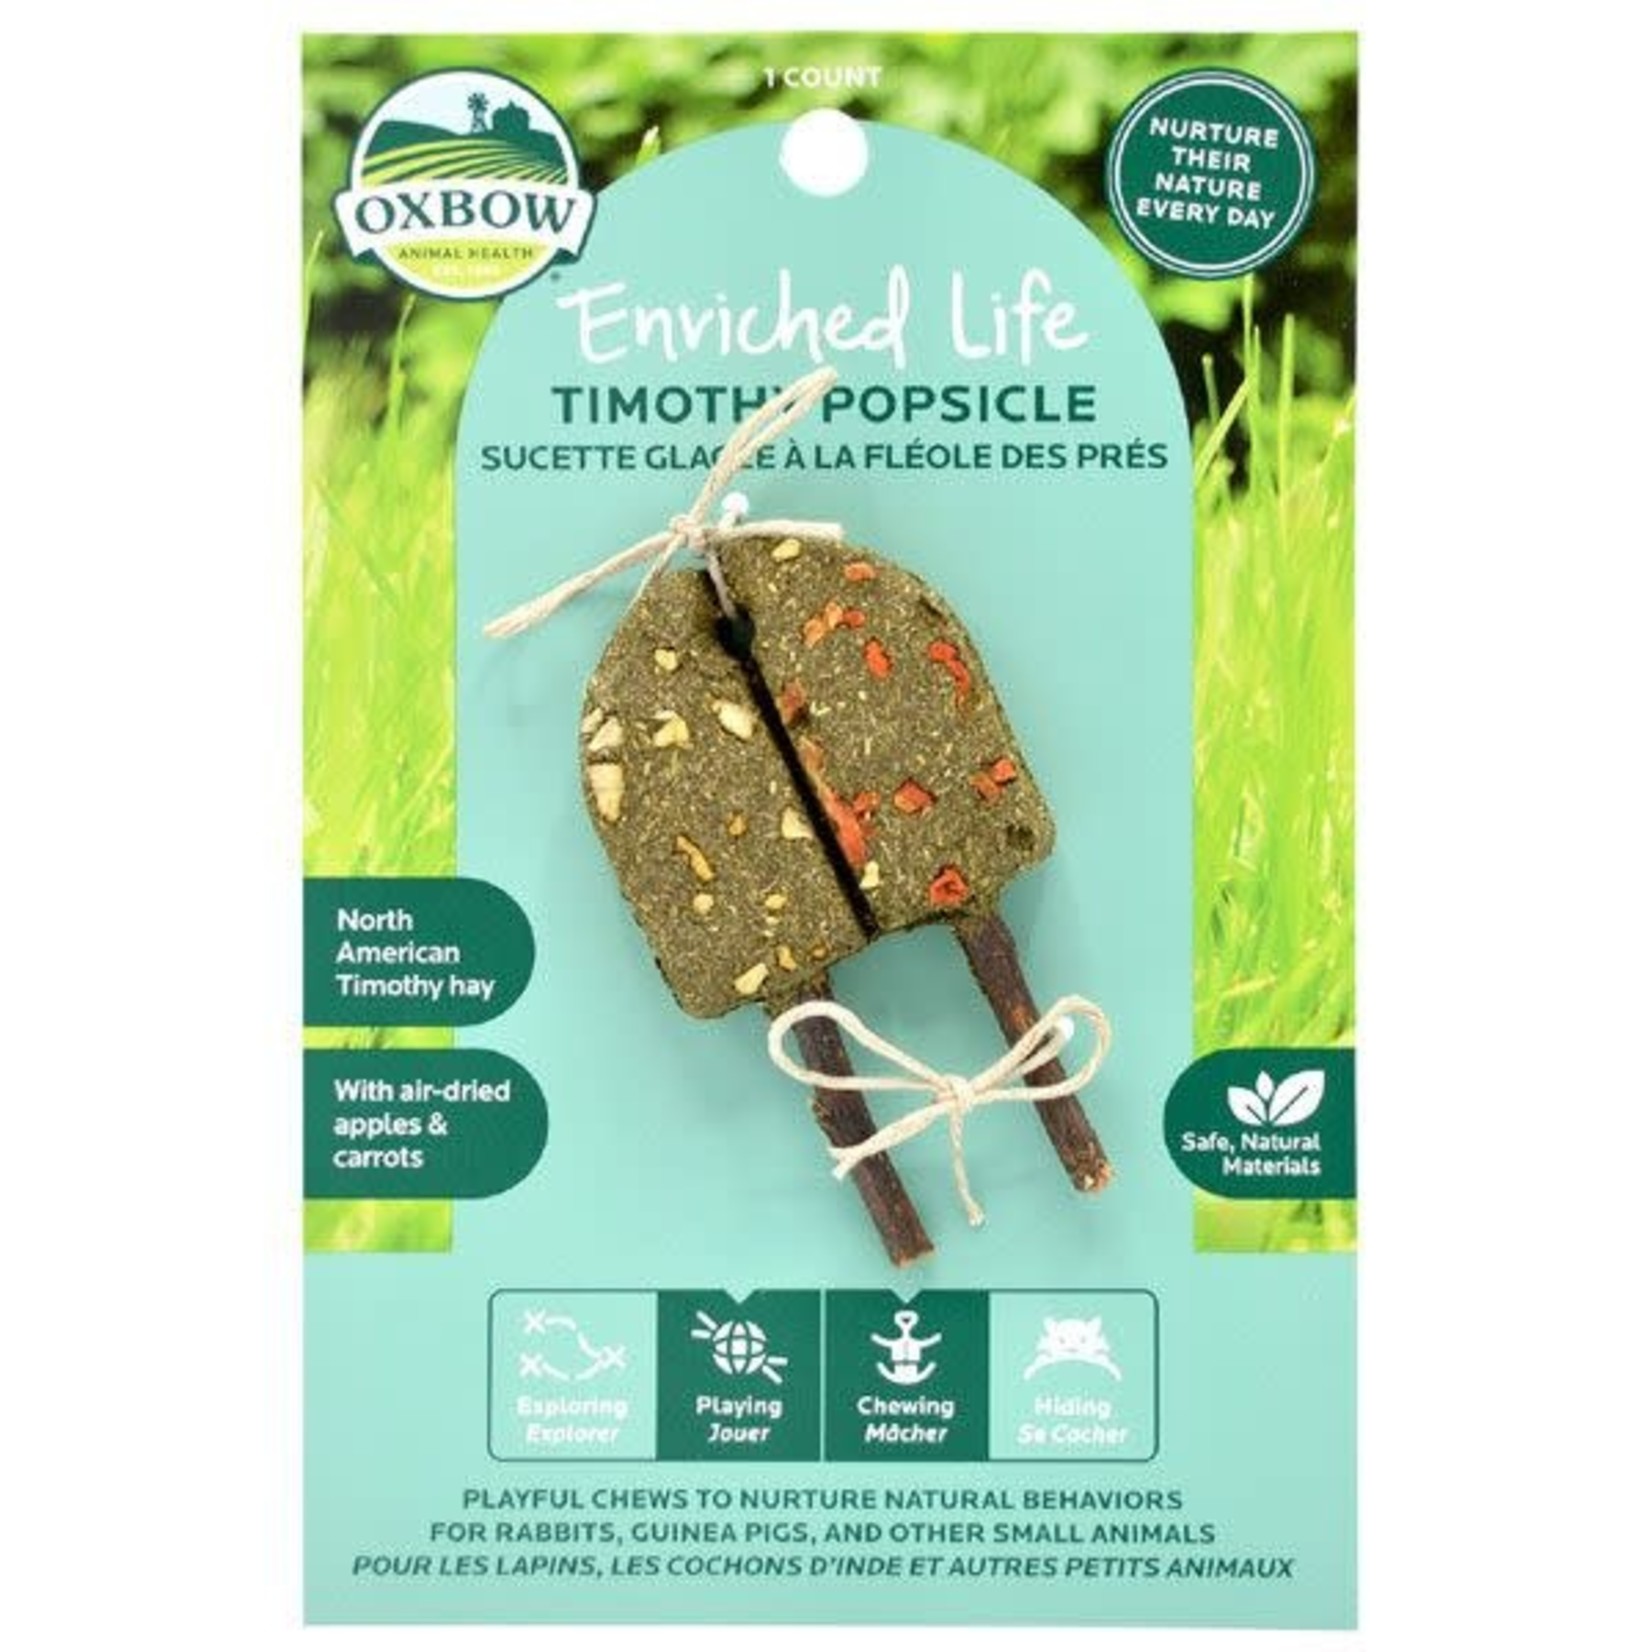 OXBOW ANIMAL HEALTH OXBOW Enriched Life Timothy Popsicle